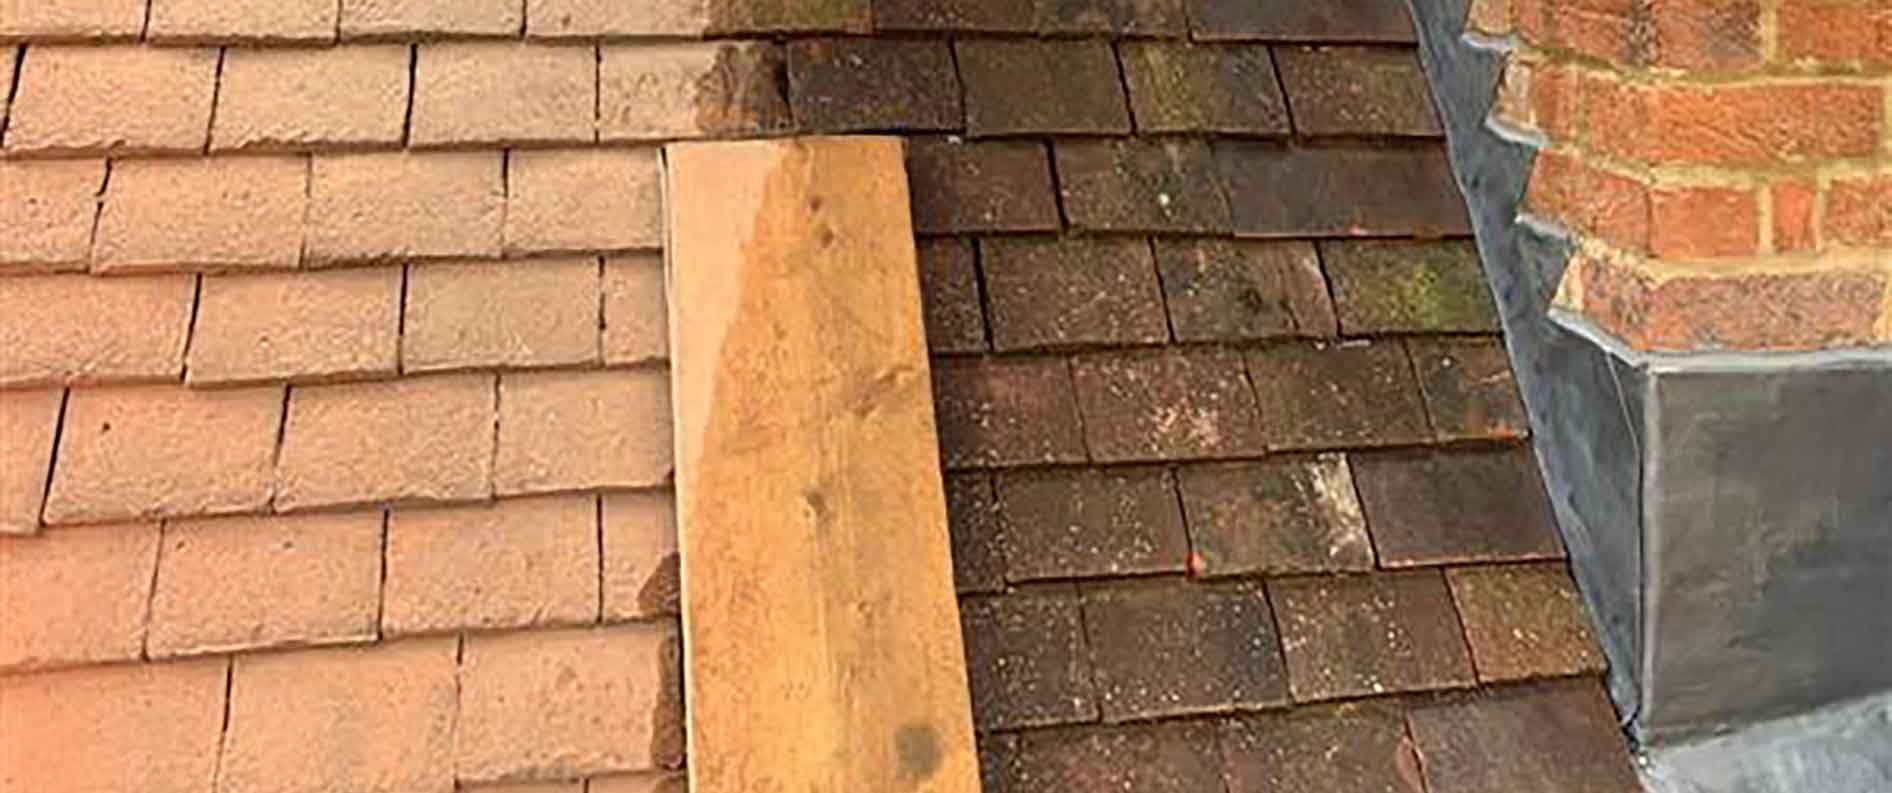 Chimney flashings repointed with lead sealant